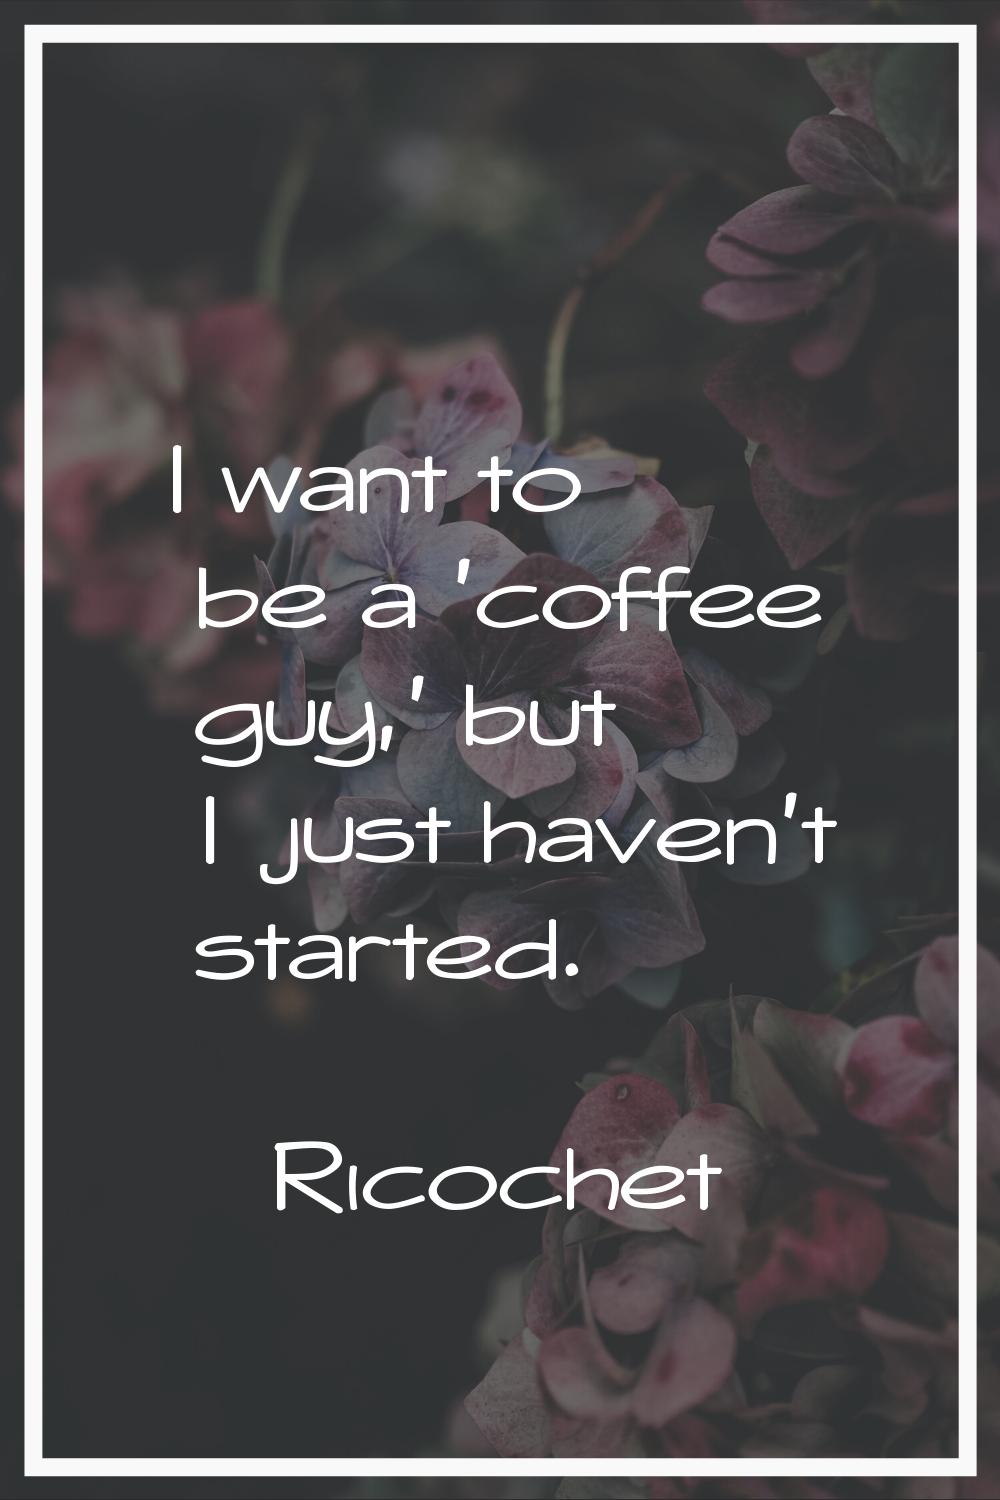 I want to be a 'coffee guy,' but I just haven't started.